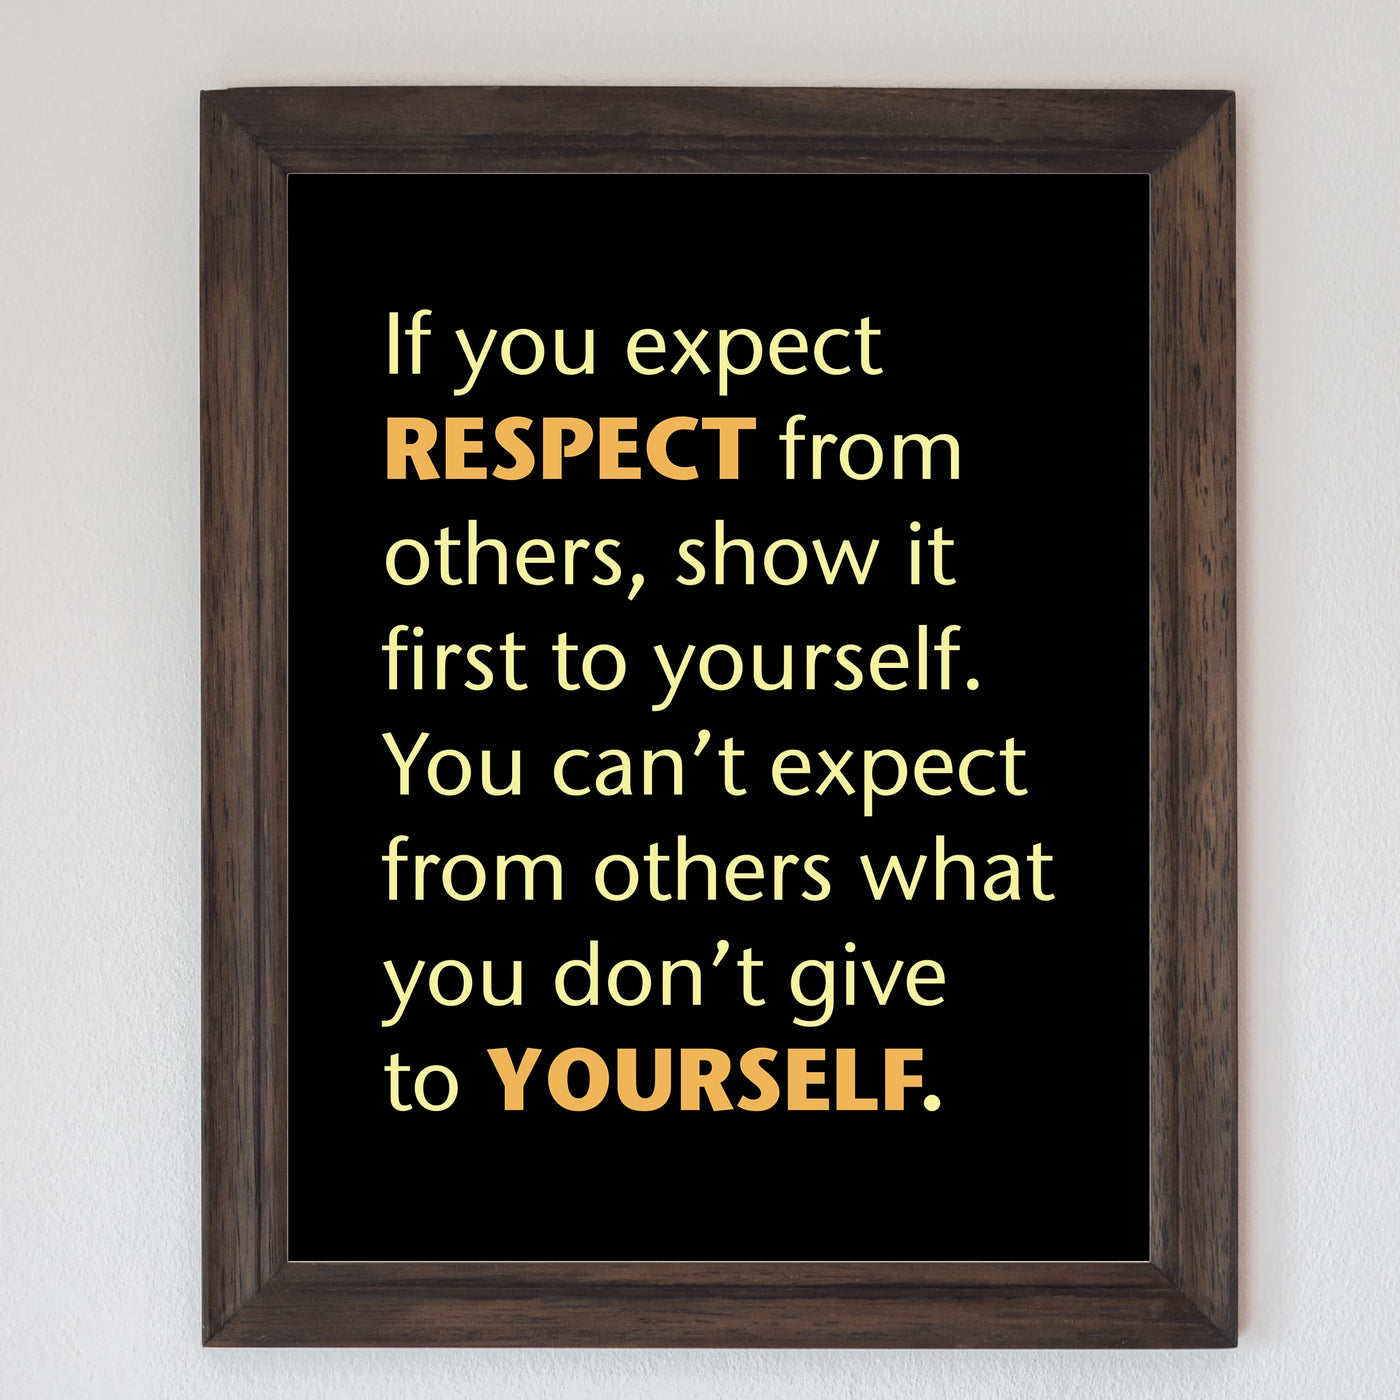 Show Respect First to Yourself- Inspirational Quotes Wall Art- 8 x 10" Life Lessons Typography Print -Ready to Frame. Motivational Decor for Home-Office-Classroom-Dorm. Great Gift & Reminder!